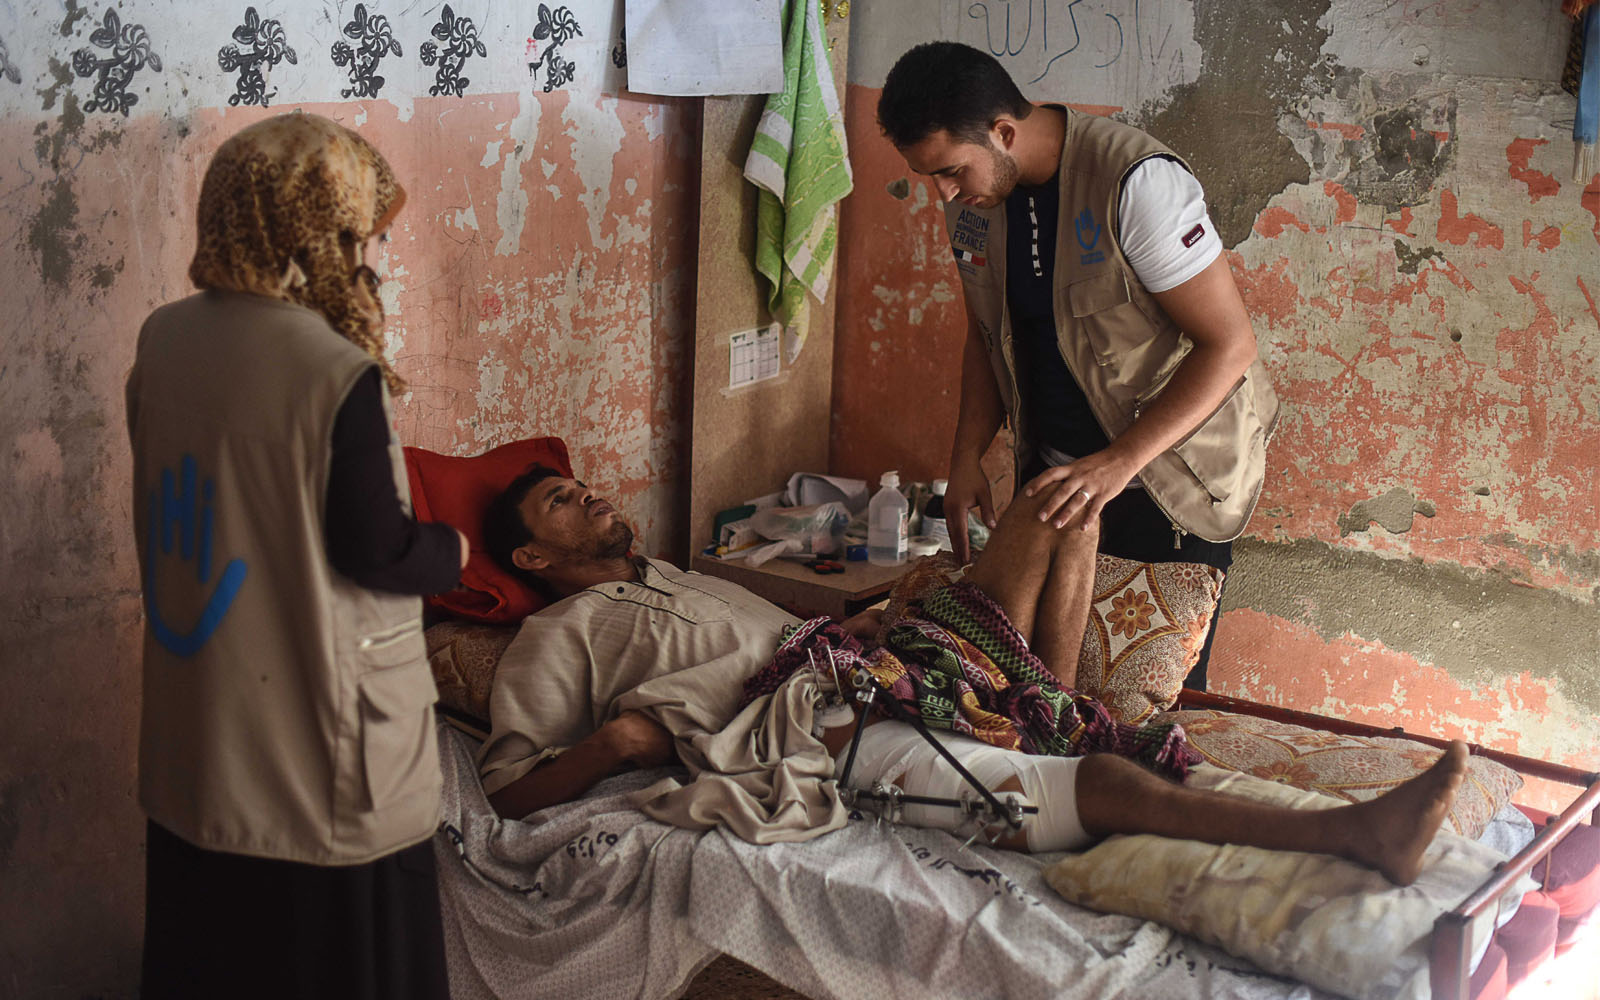 Gaza, rehabilitation session set up by HI for one injured person